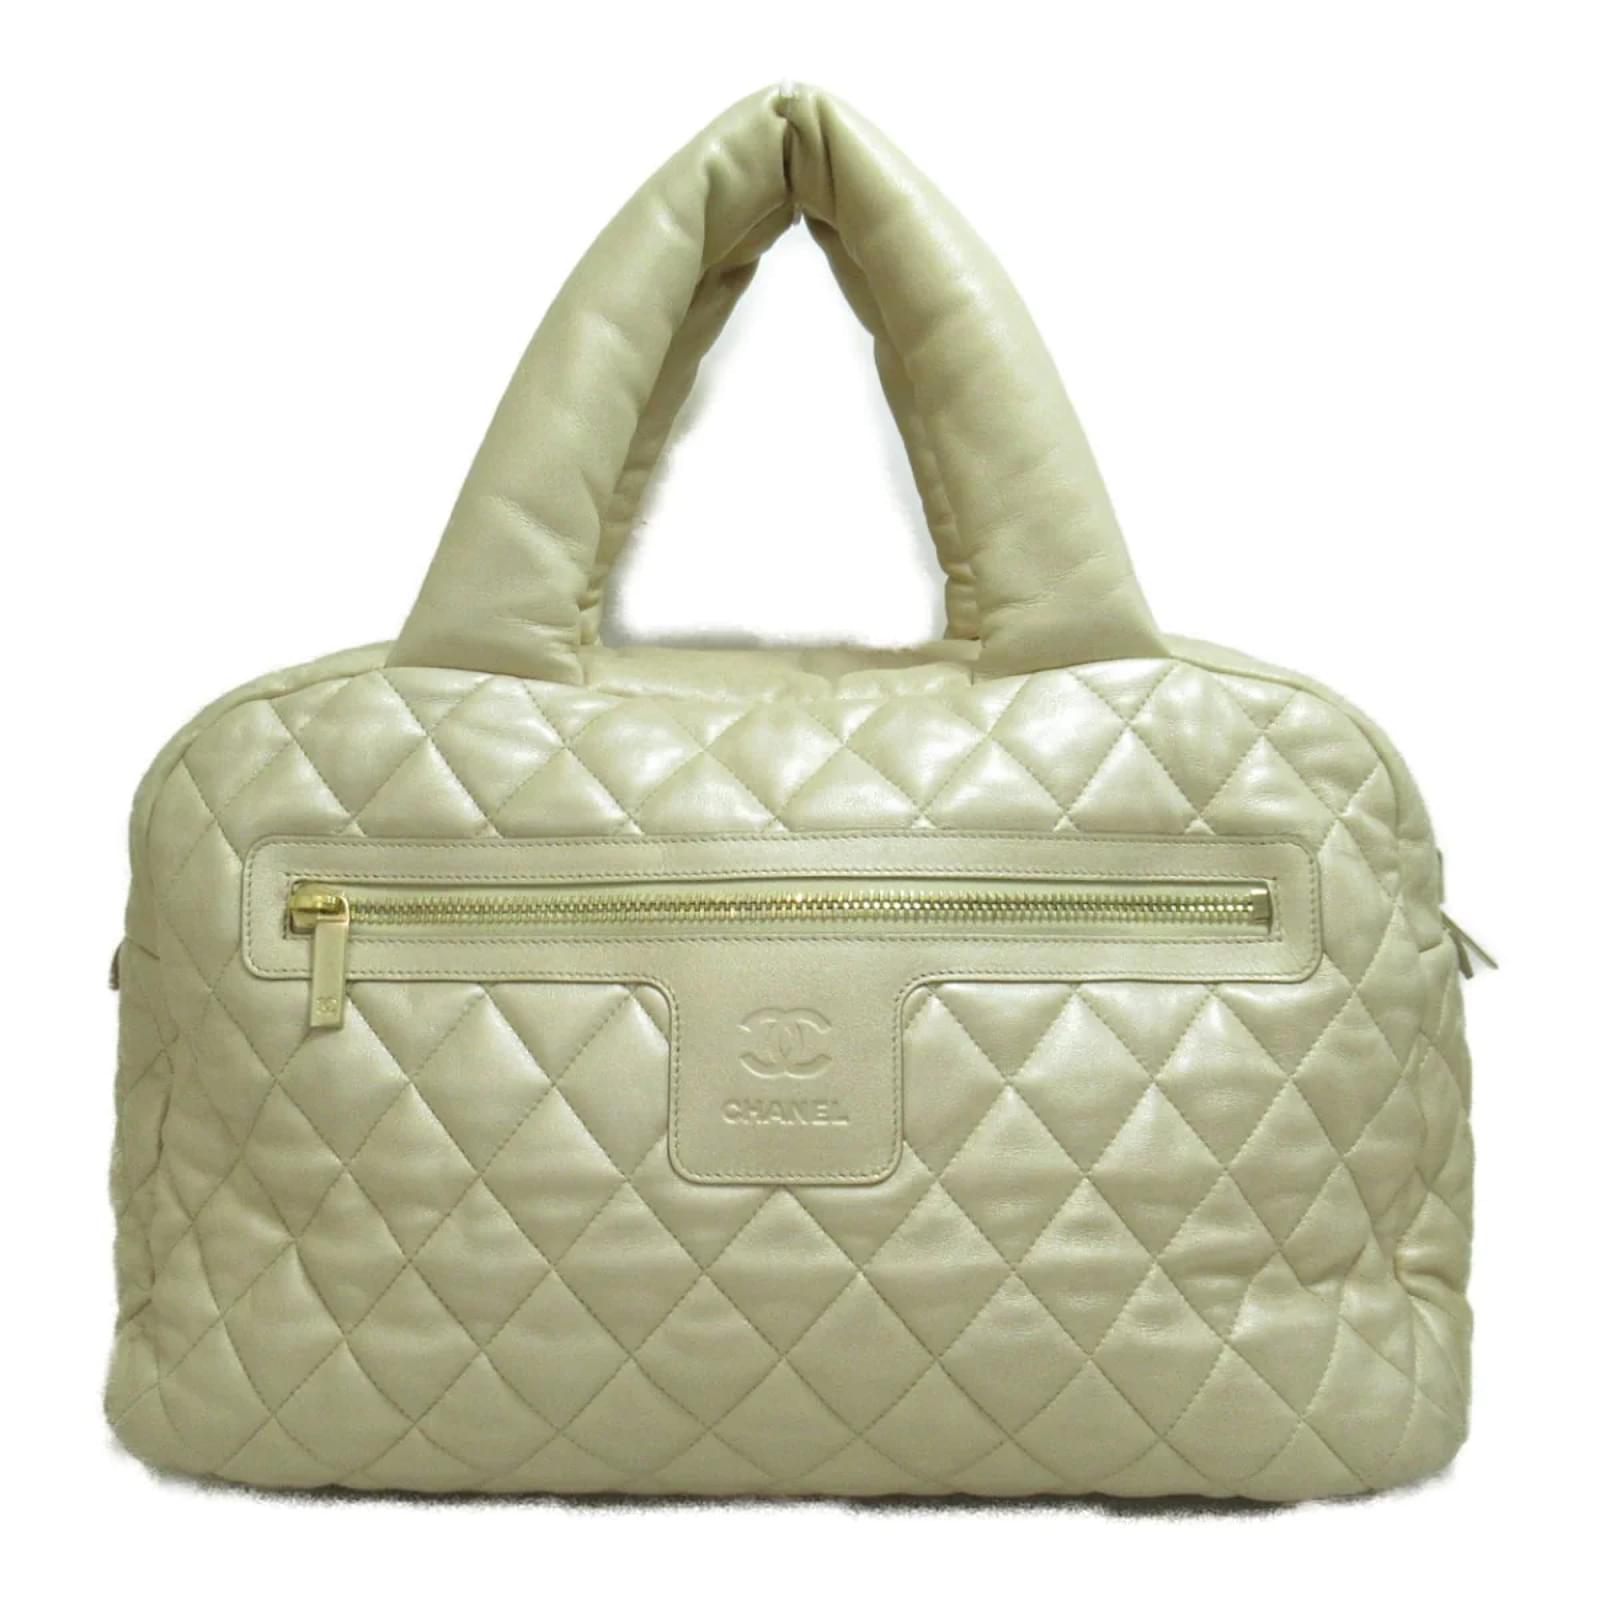 Chanel Quilted Leather Coco Cocoon Bowling Bag Golden Pony-style